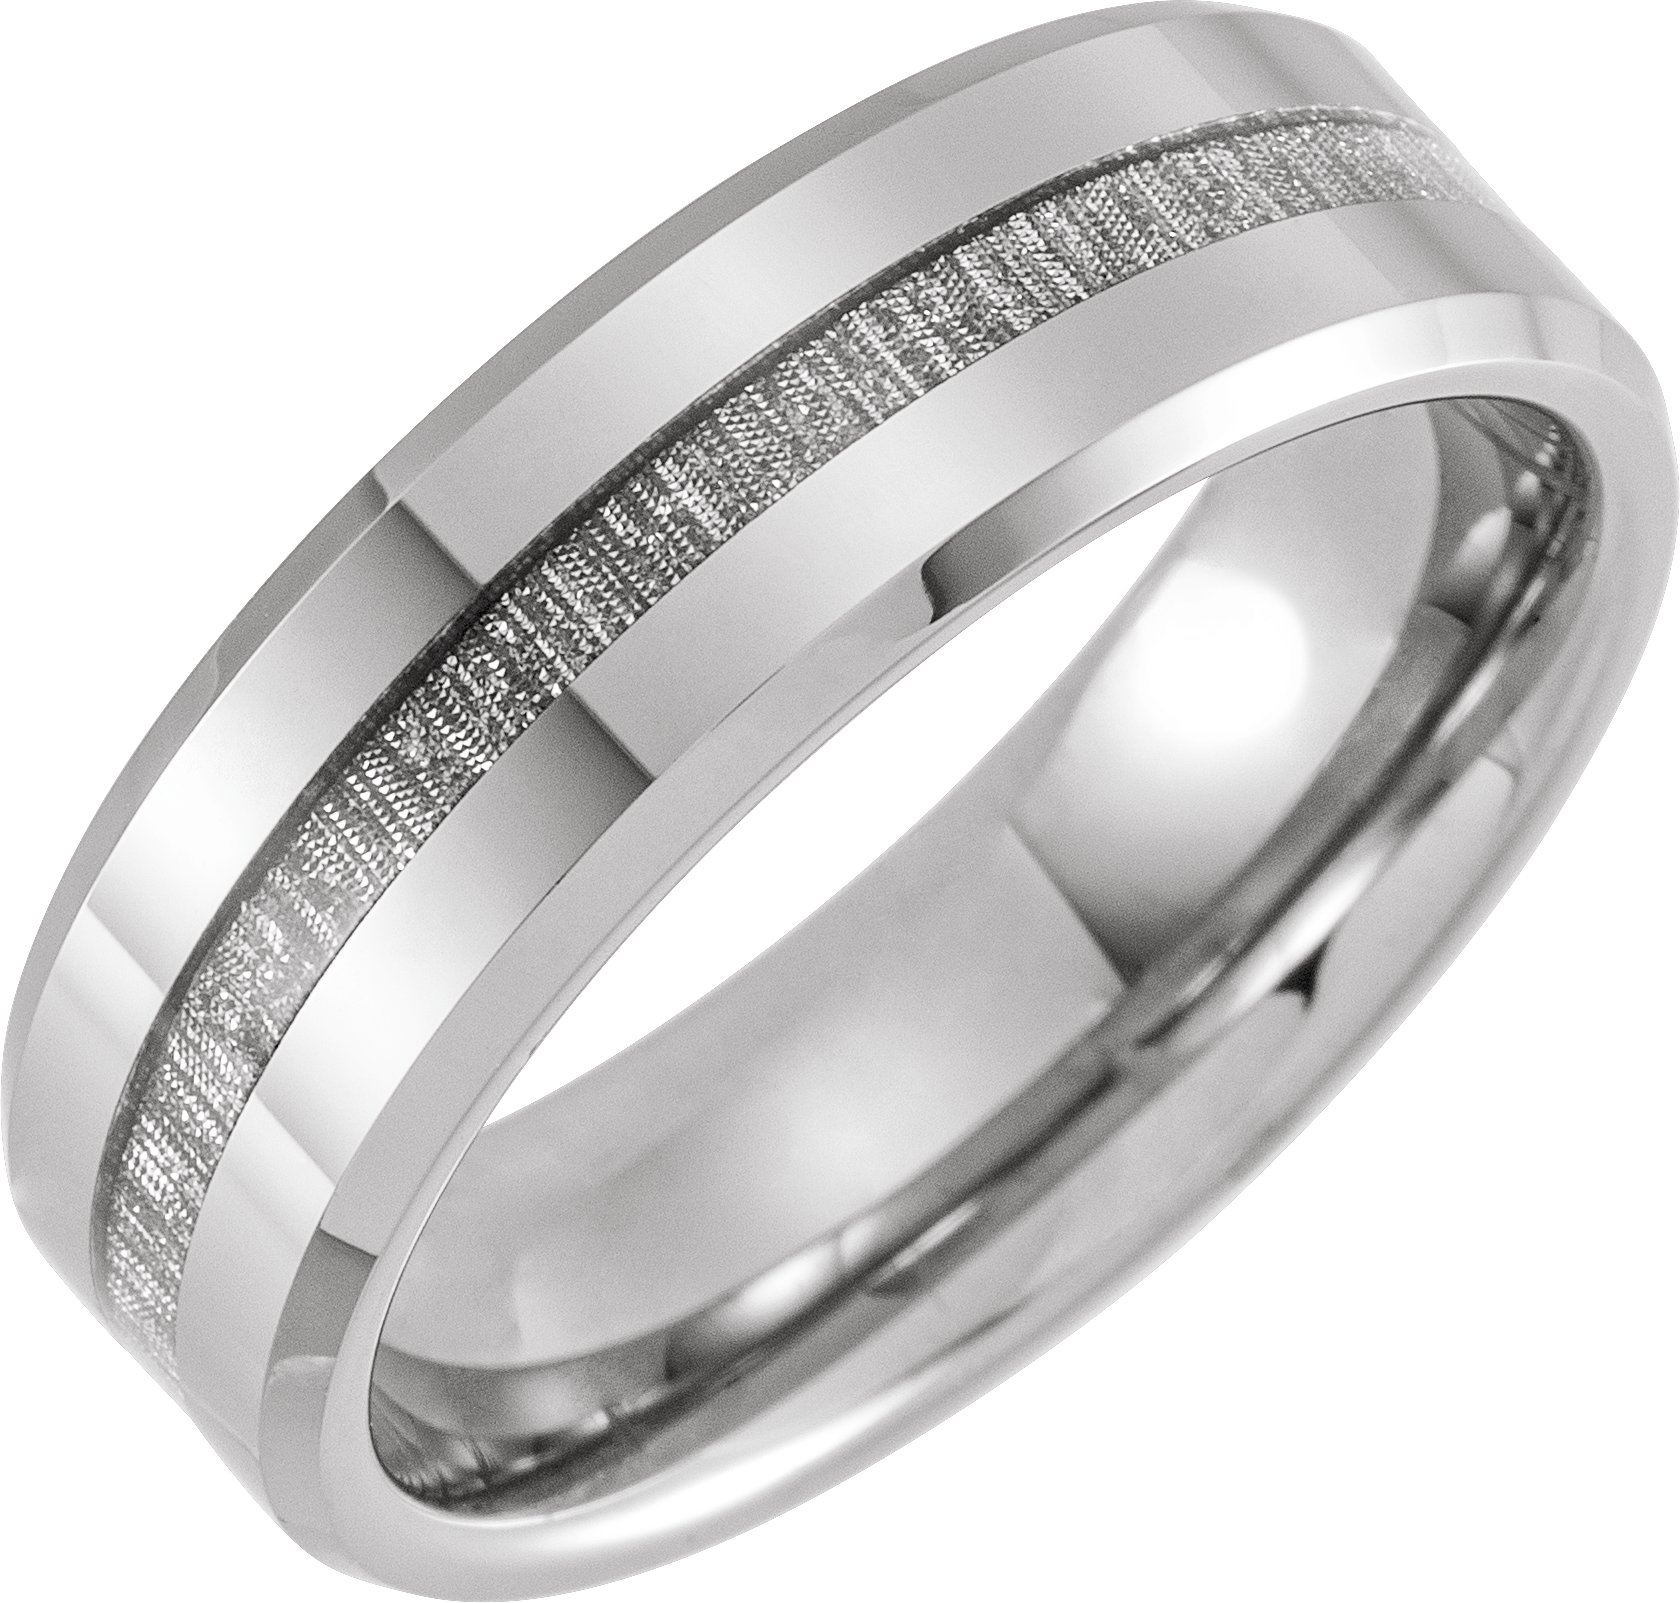 Tungsten 8 mm Beveled Band with Manmade Meteorite Inlay Size 9.5